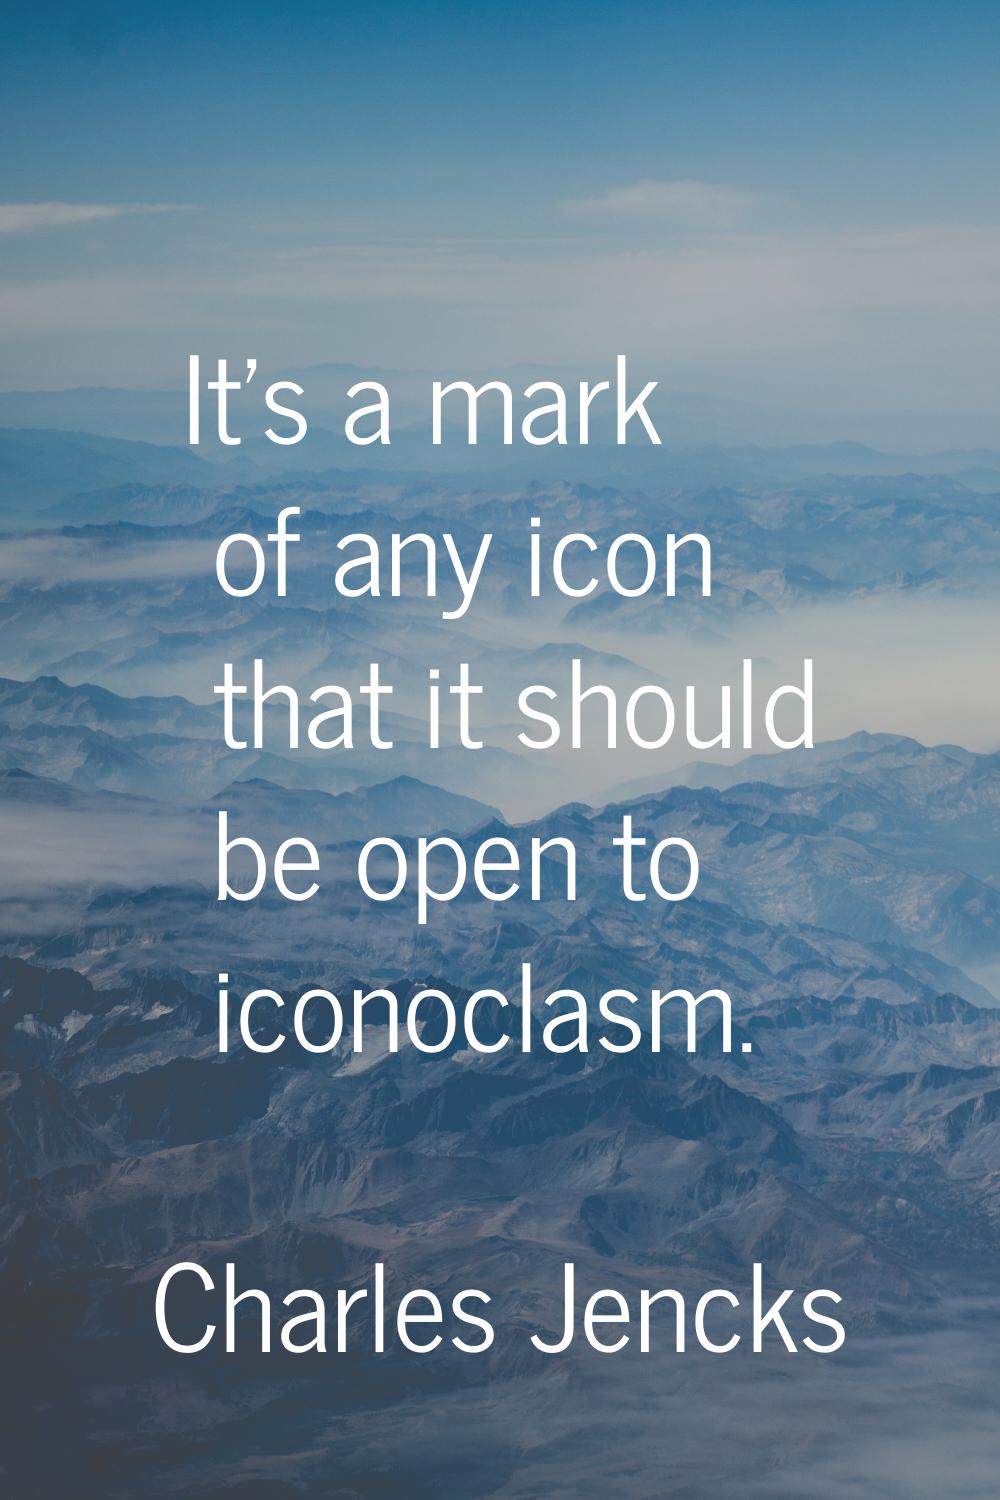 It's a mark of any icon that it should be open to iconoclasm.